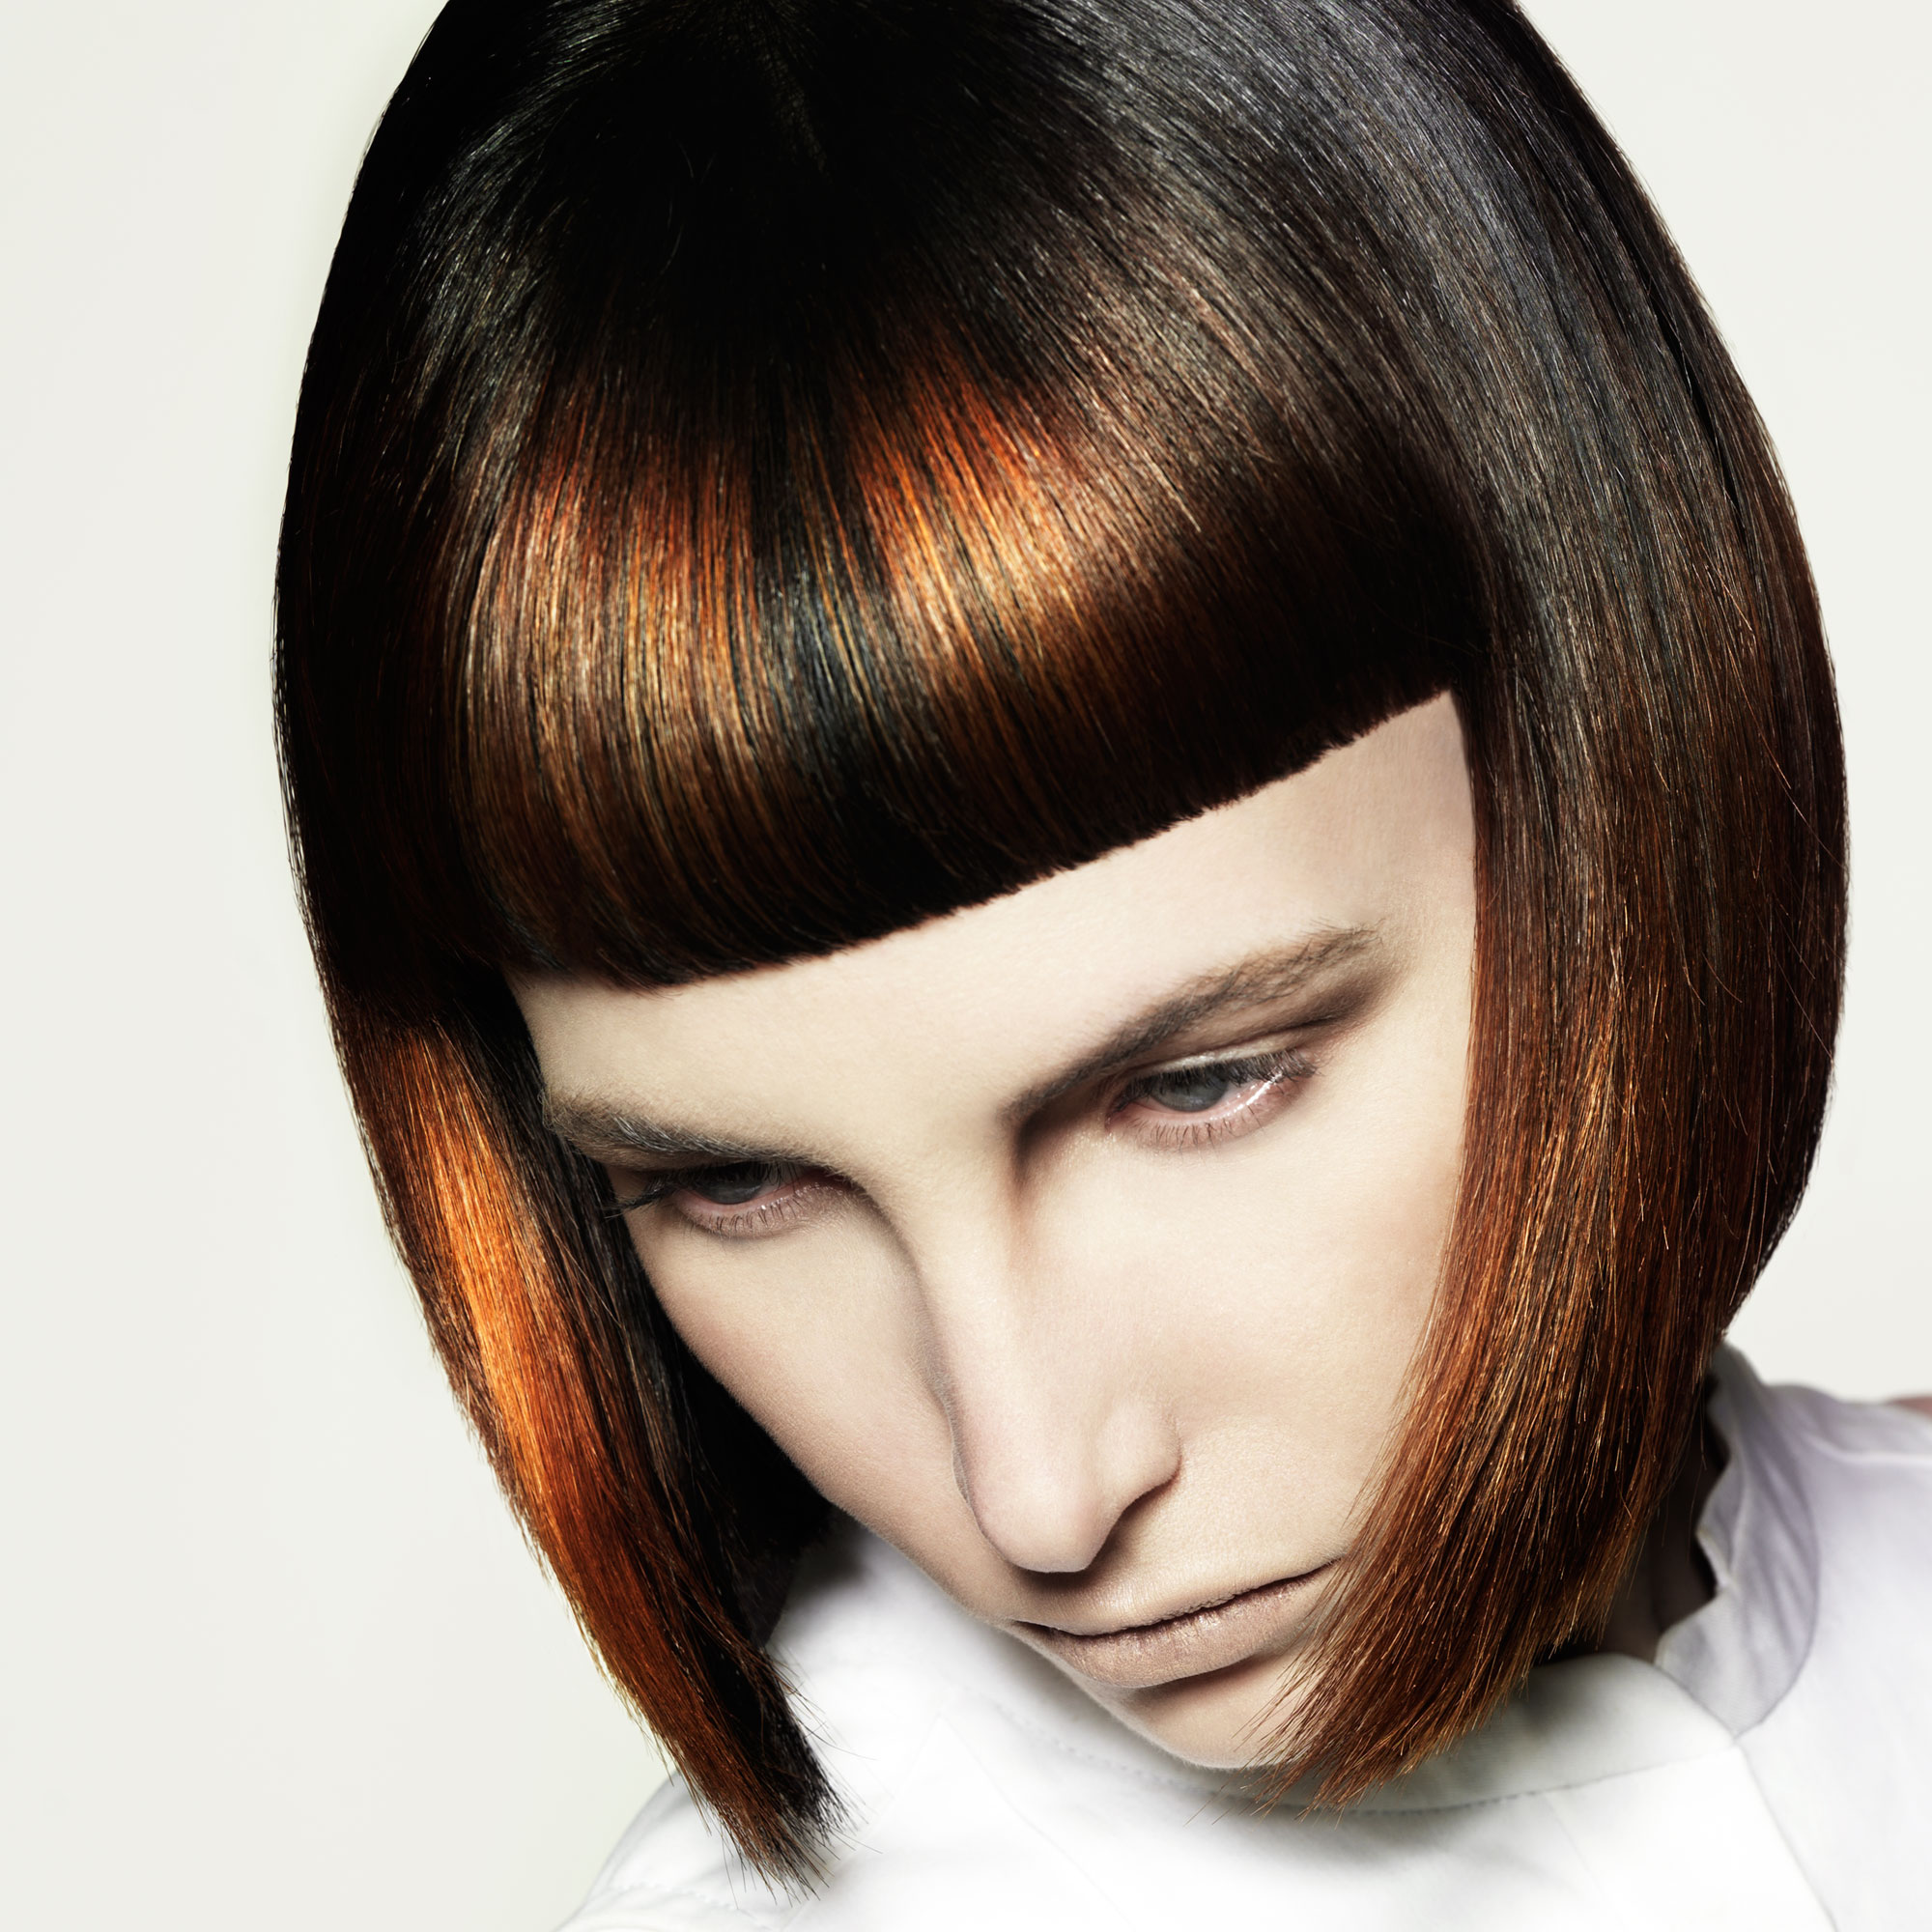 Photo of a model bob hairstyle with fringe